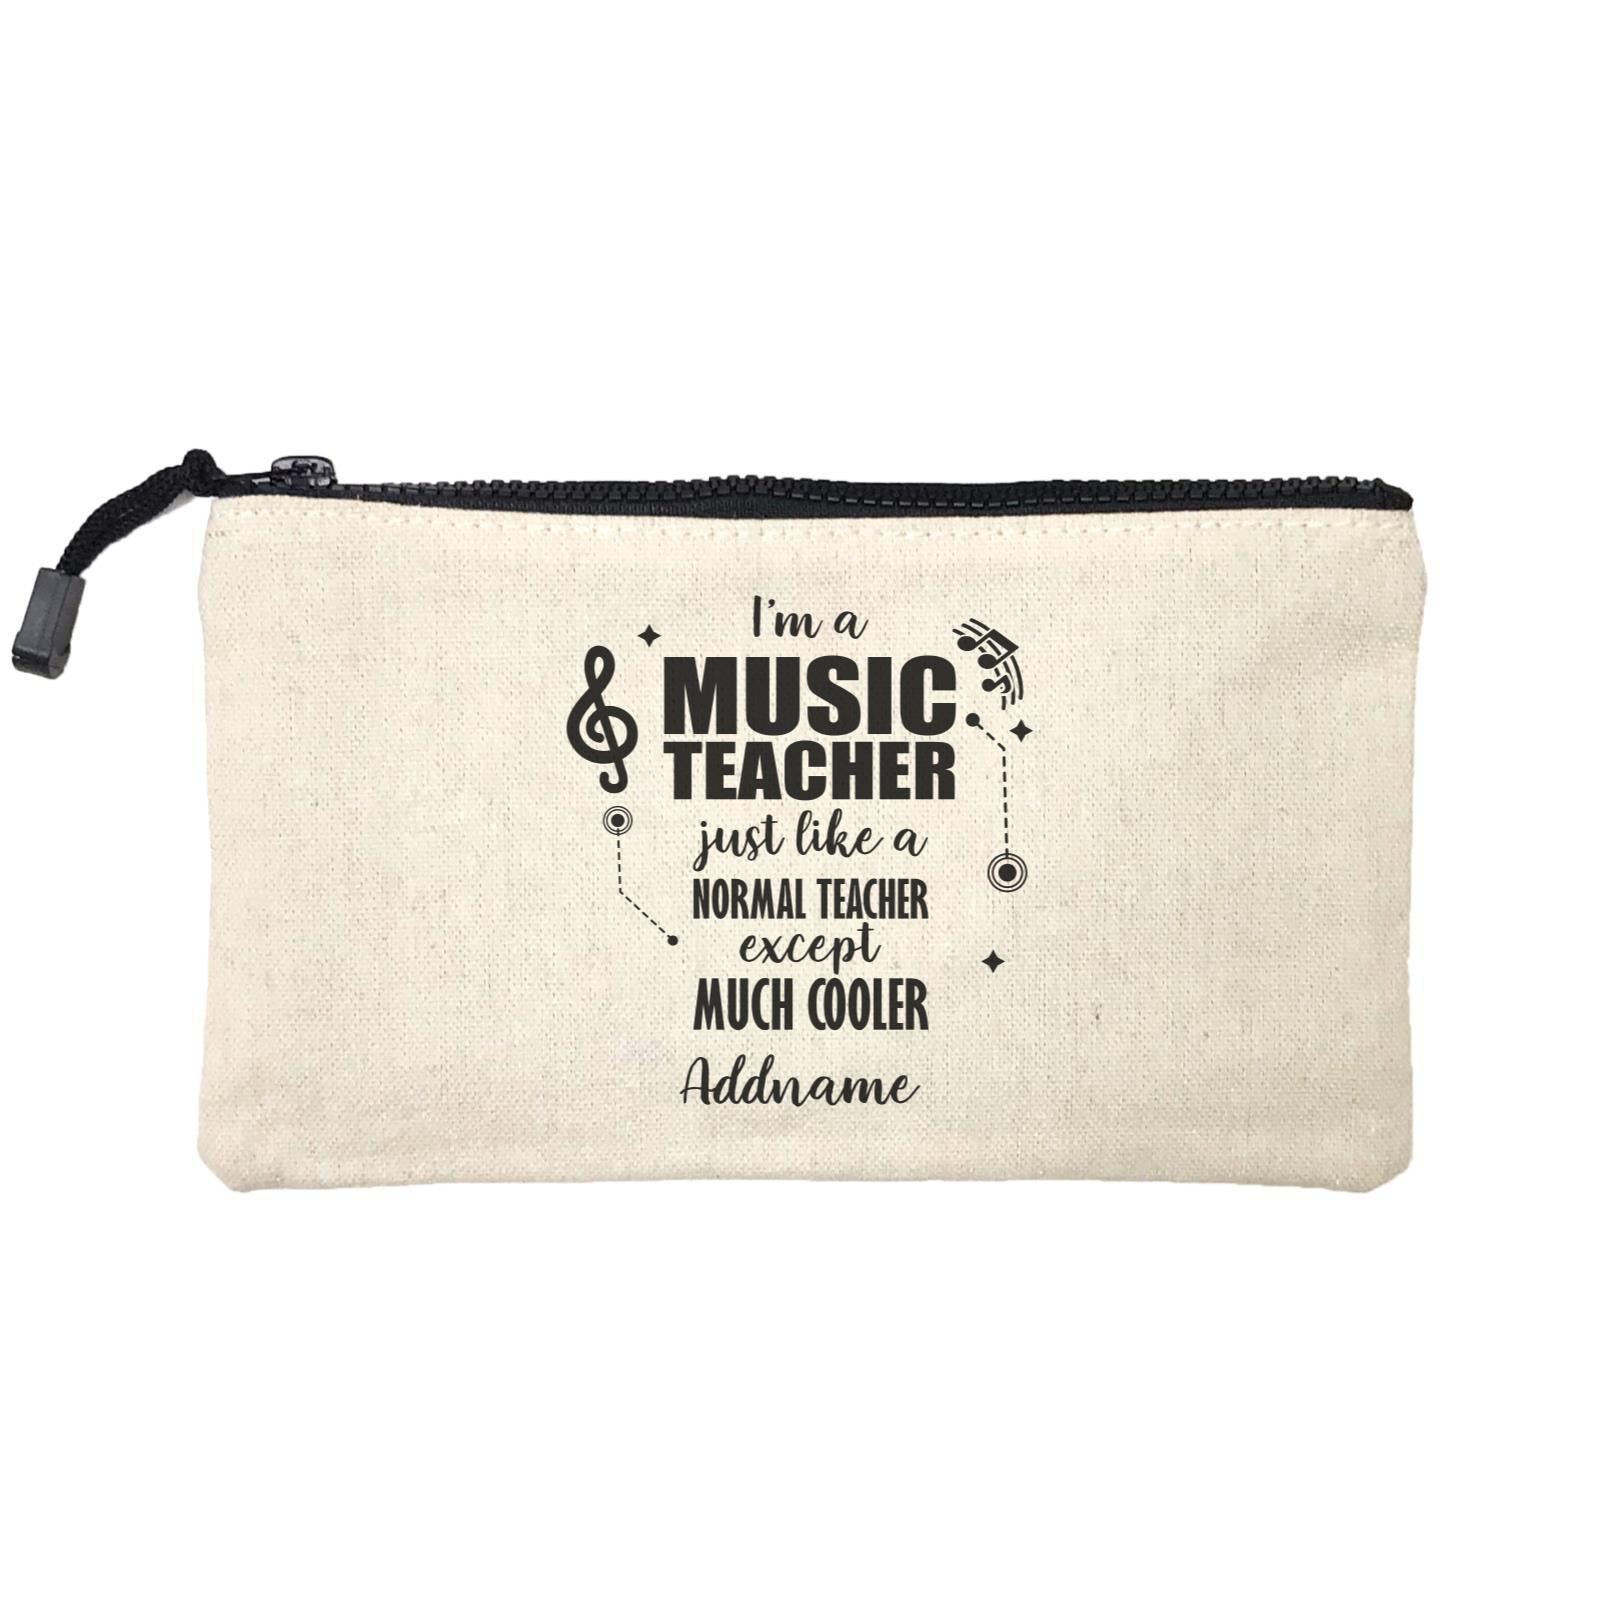 Subject Teachers 3 I'm A Music Teacher Addname Mini Accessories Stationery Pouch